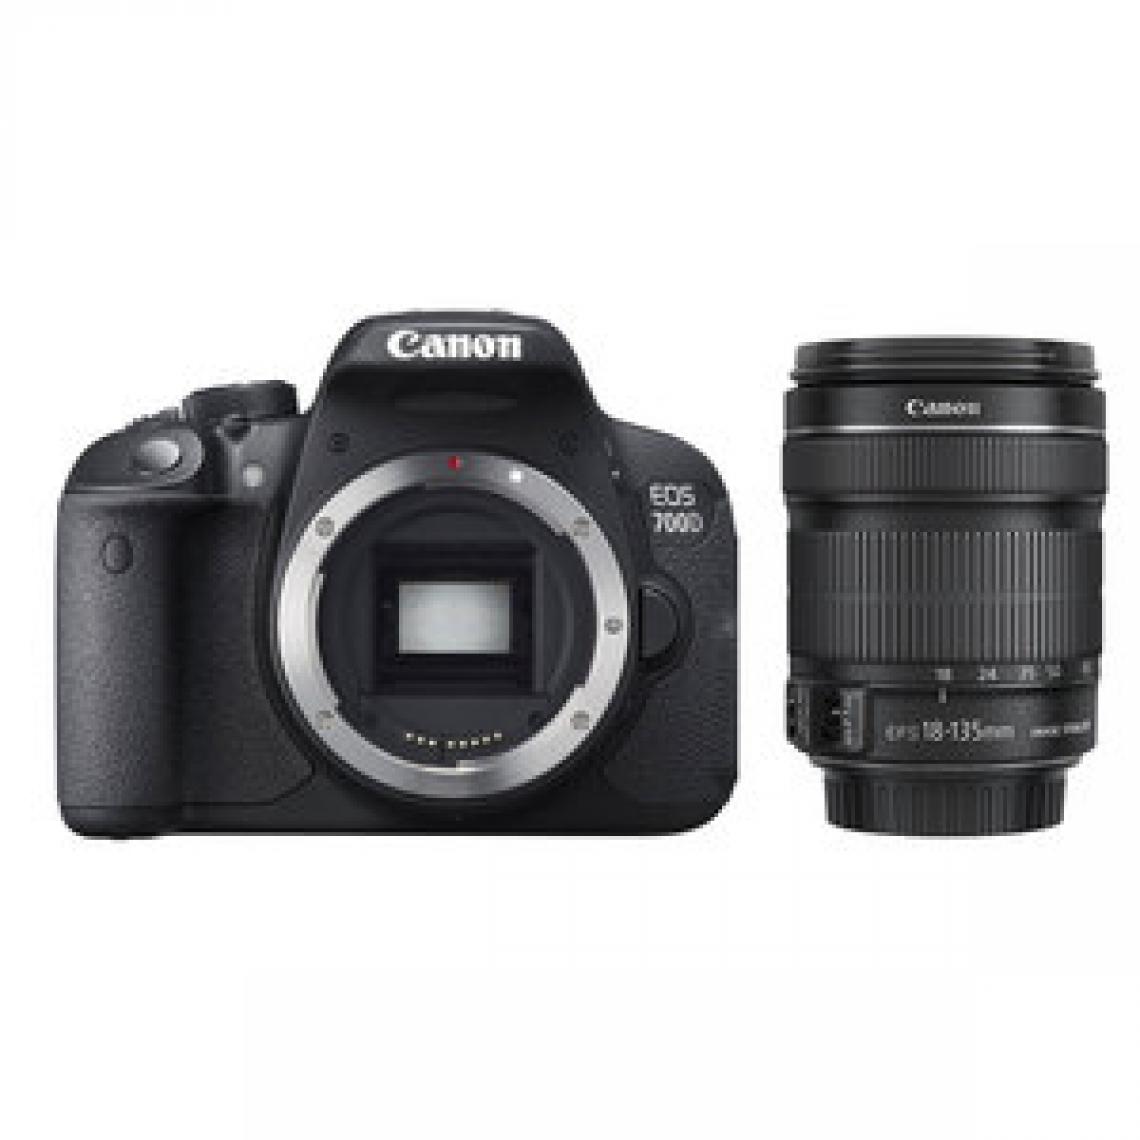 Canon - EOS 700D + EF-S 18-135mm f/3.5-5.6 IS STM - Appareil compact